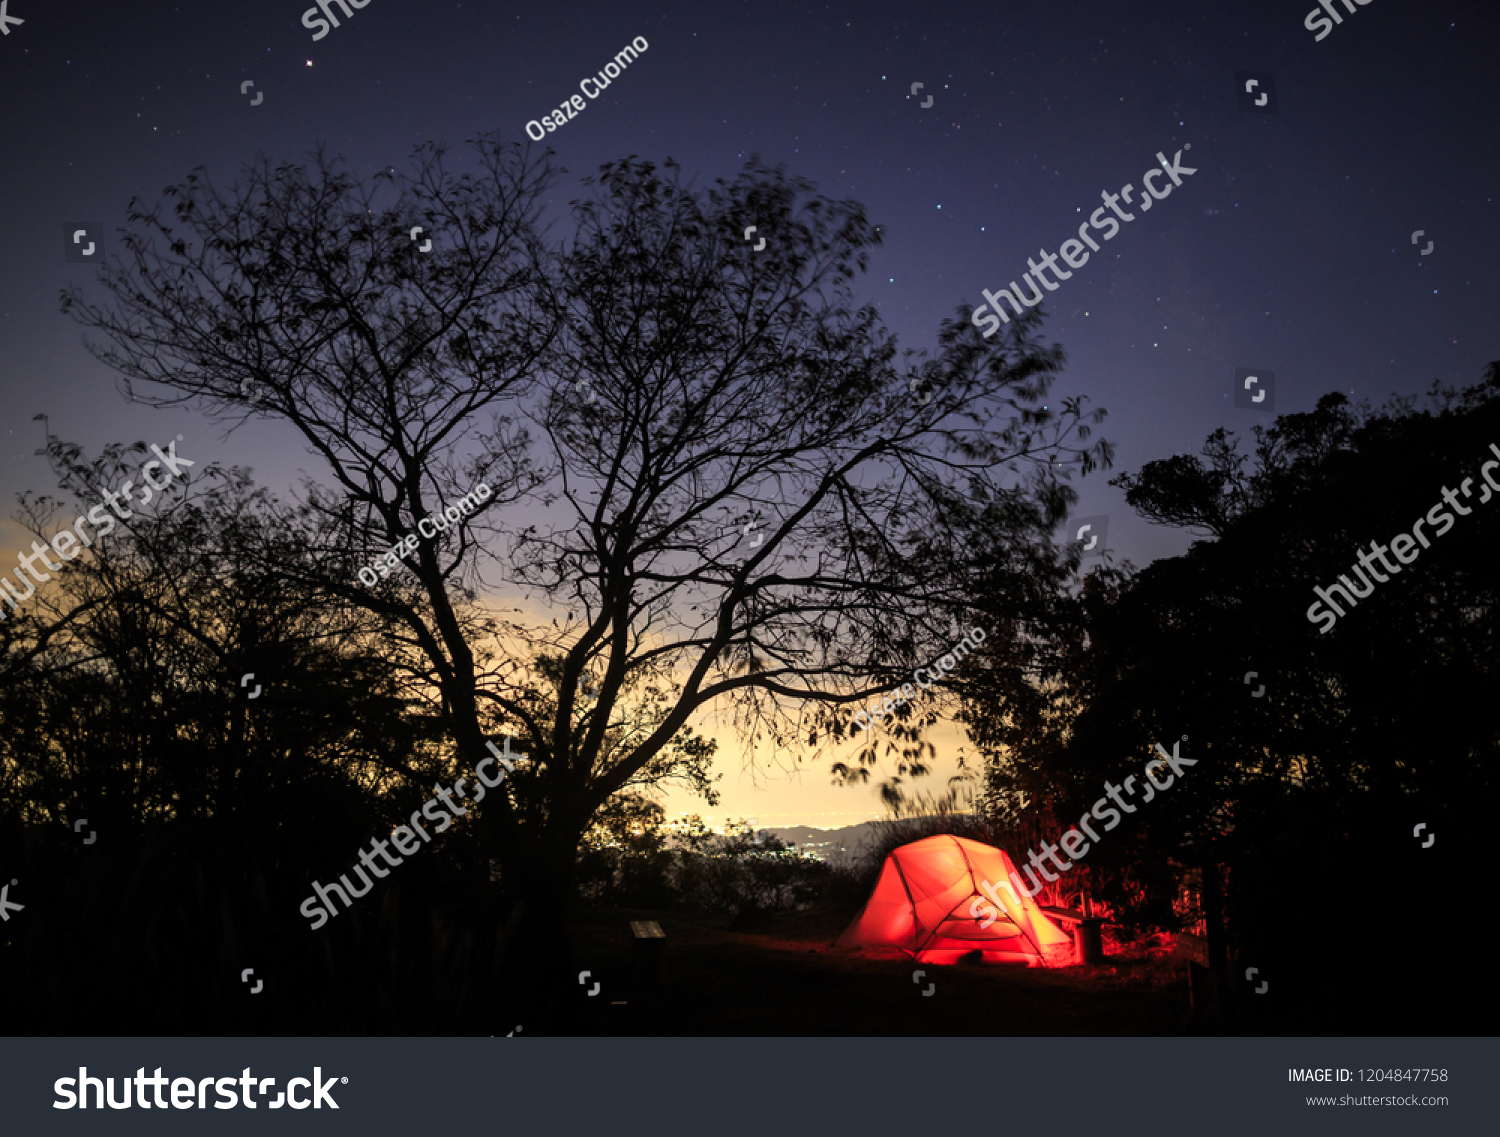 Tent glows red against distant glow from city and starry night sky #1204847758